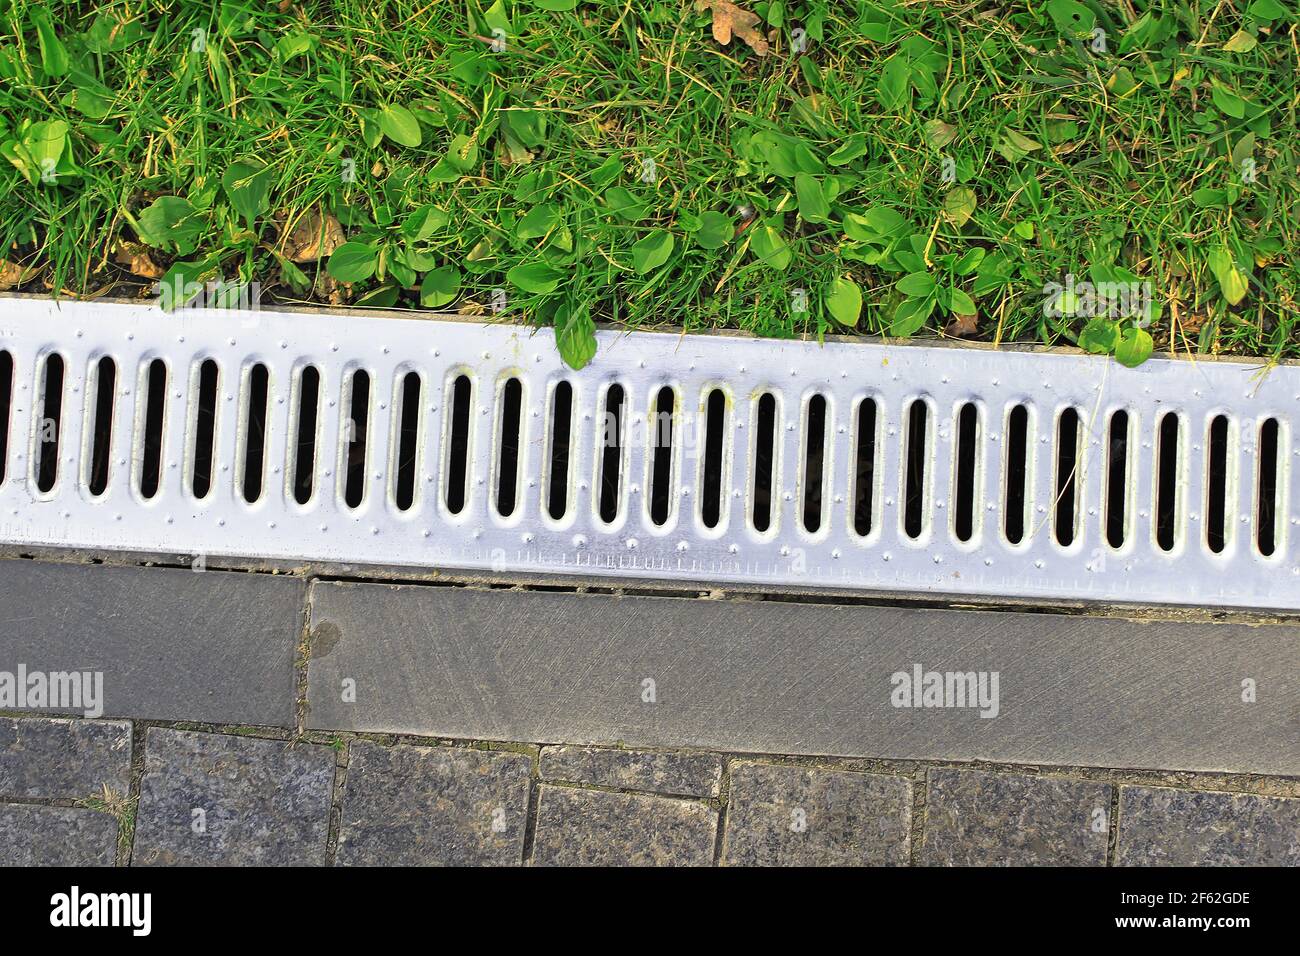 Drainage system separates the grass and the paved sidewalk. Sewerage and grate on the ground for water drainage Stock Photo